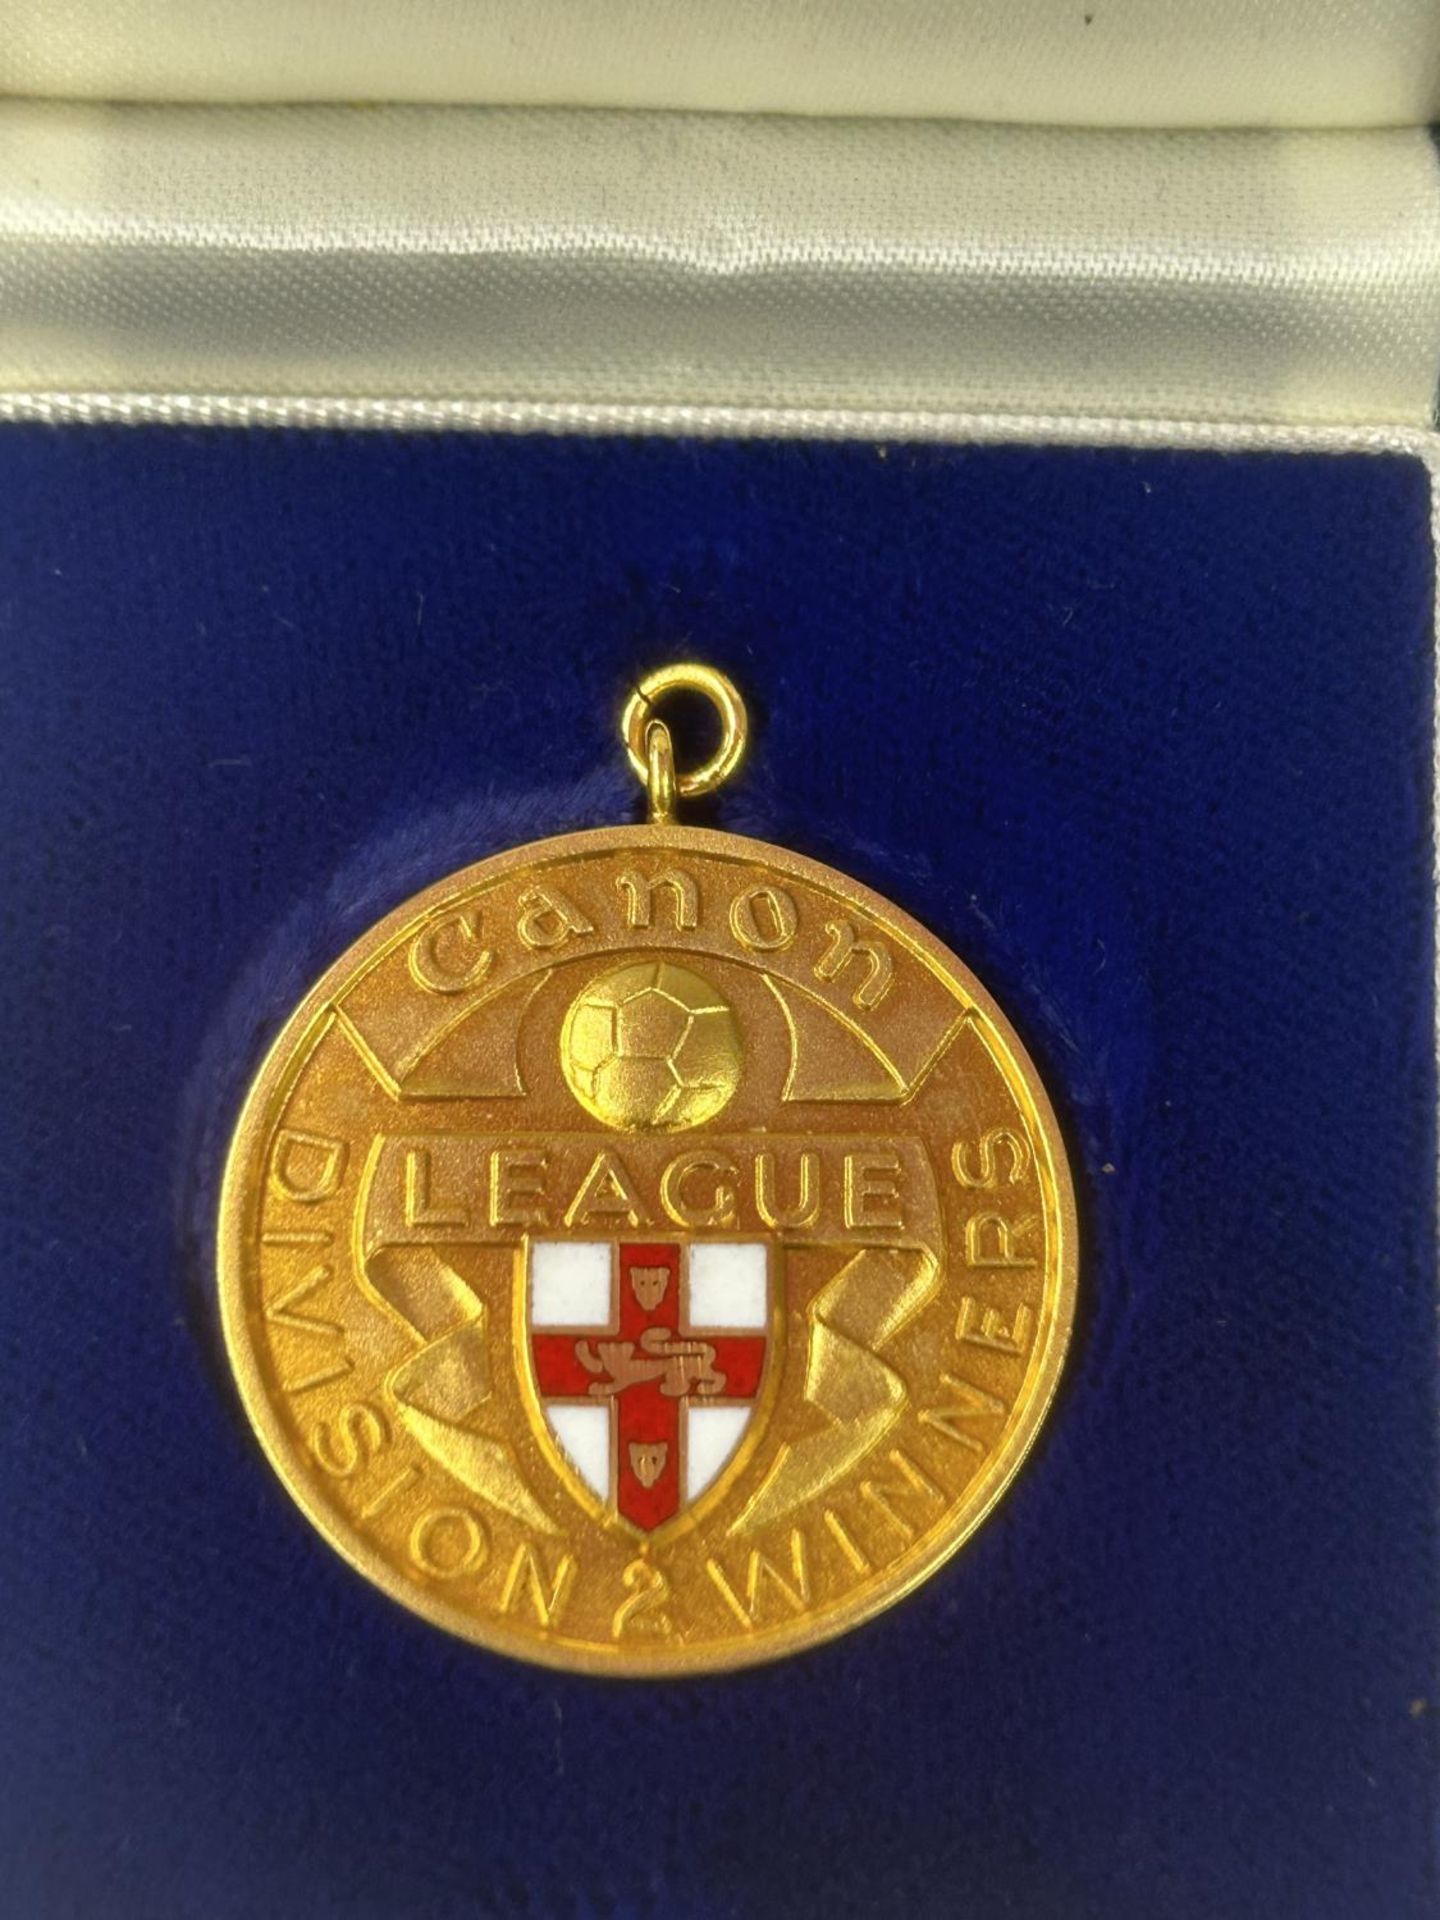 A HALLMARKED 9 CARAT GOLD & ENAMEL FOOTBALL LEAGUE CANON DIVISION 2 LEAGUE WINNERS MEDAL 1984-1985 - Image 2 of 5